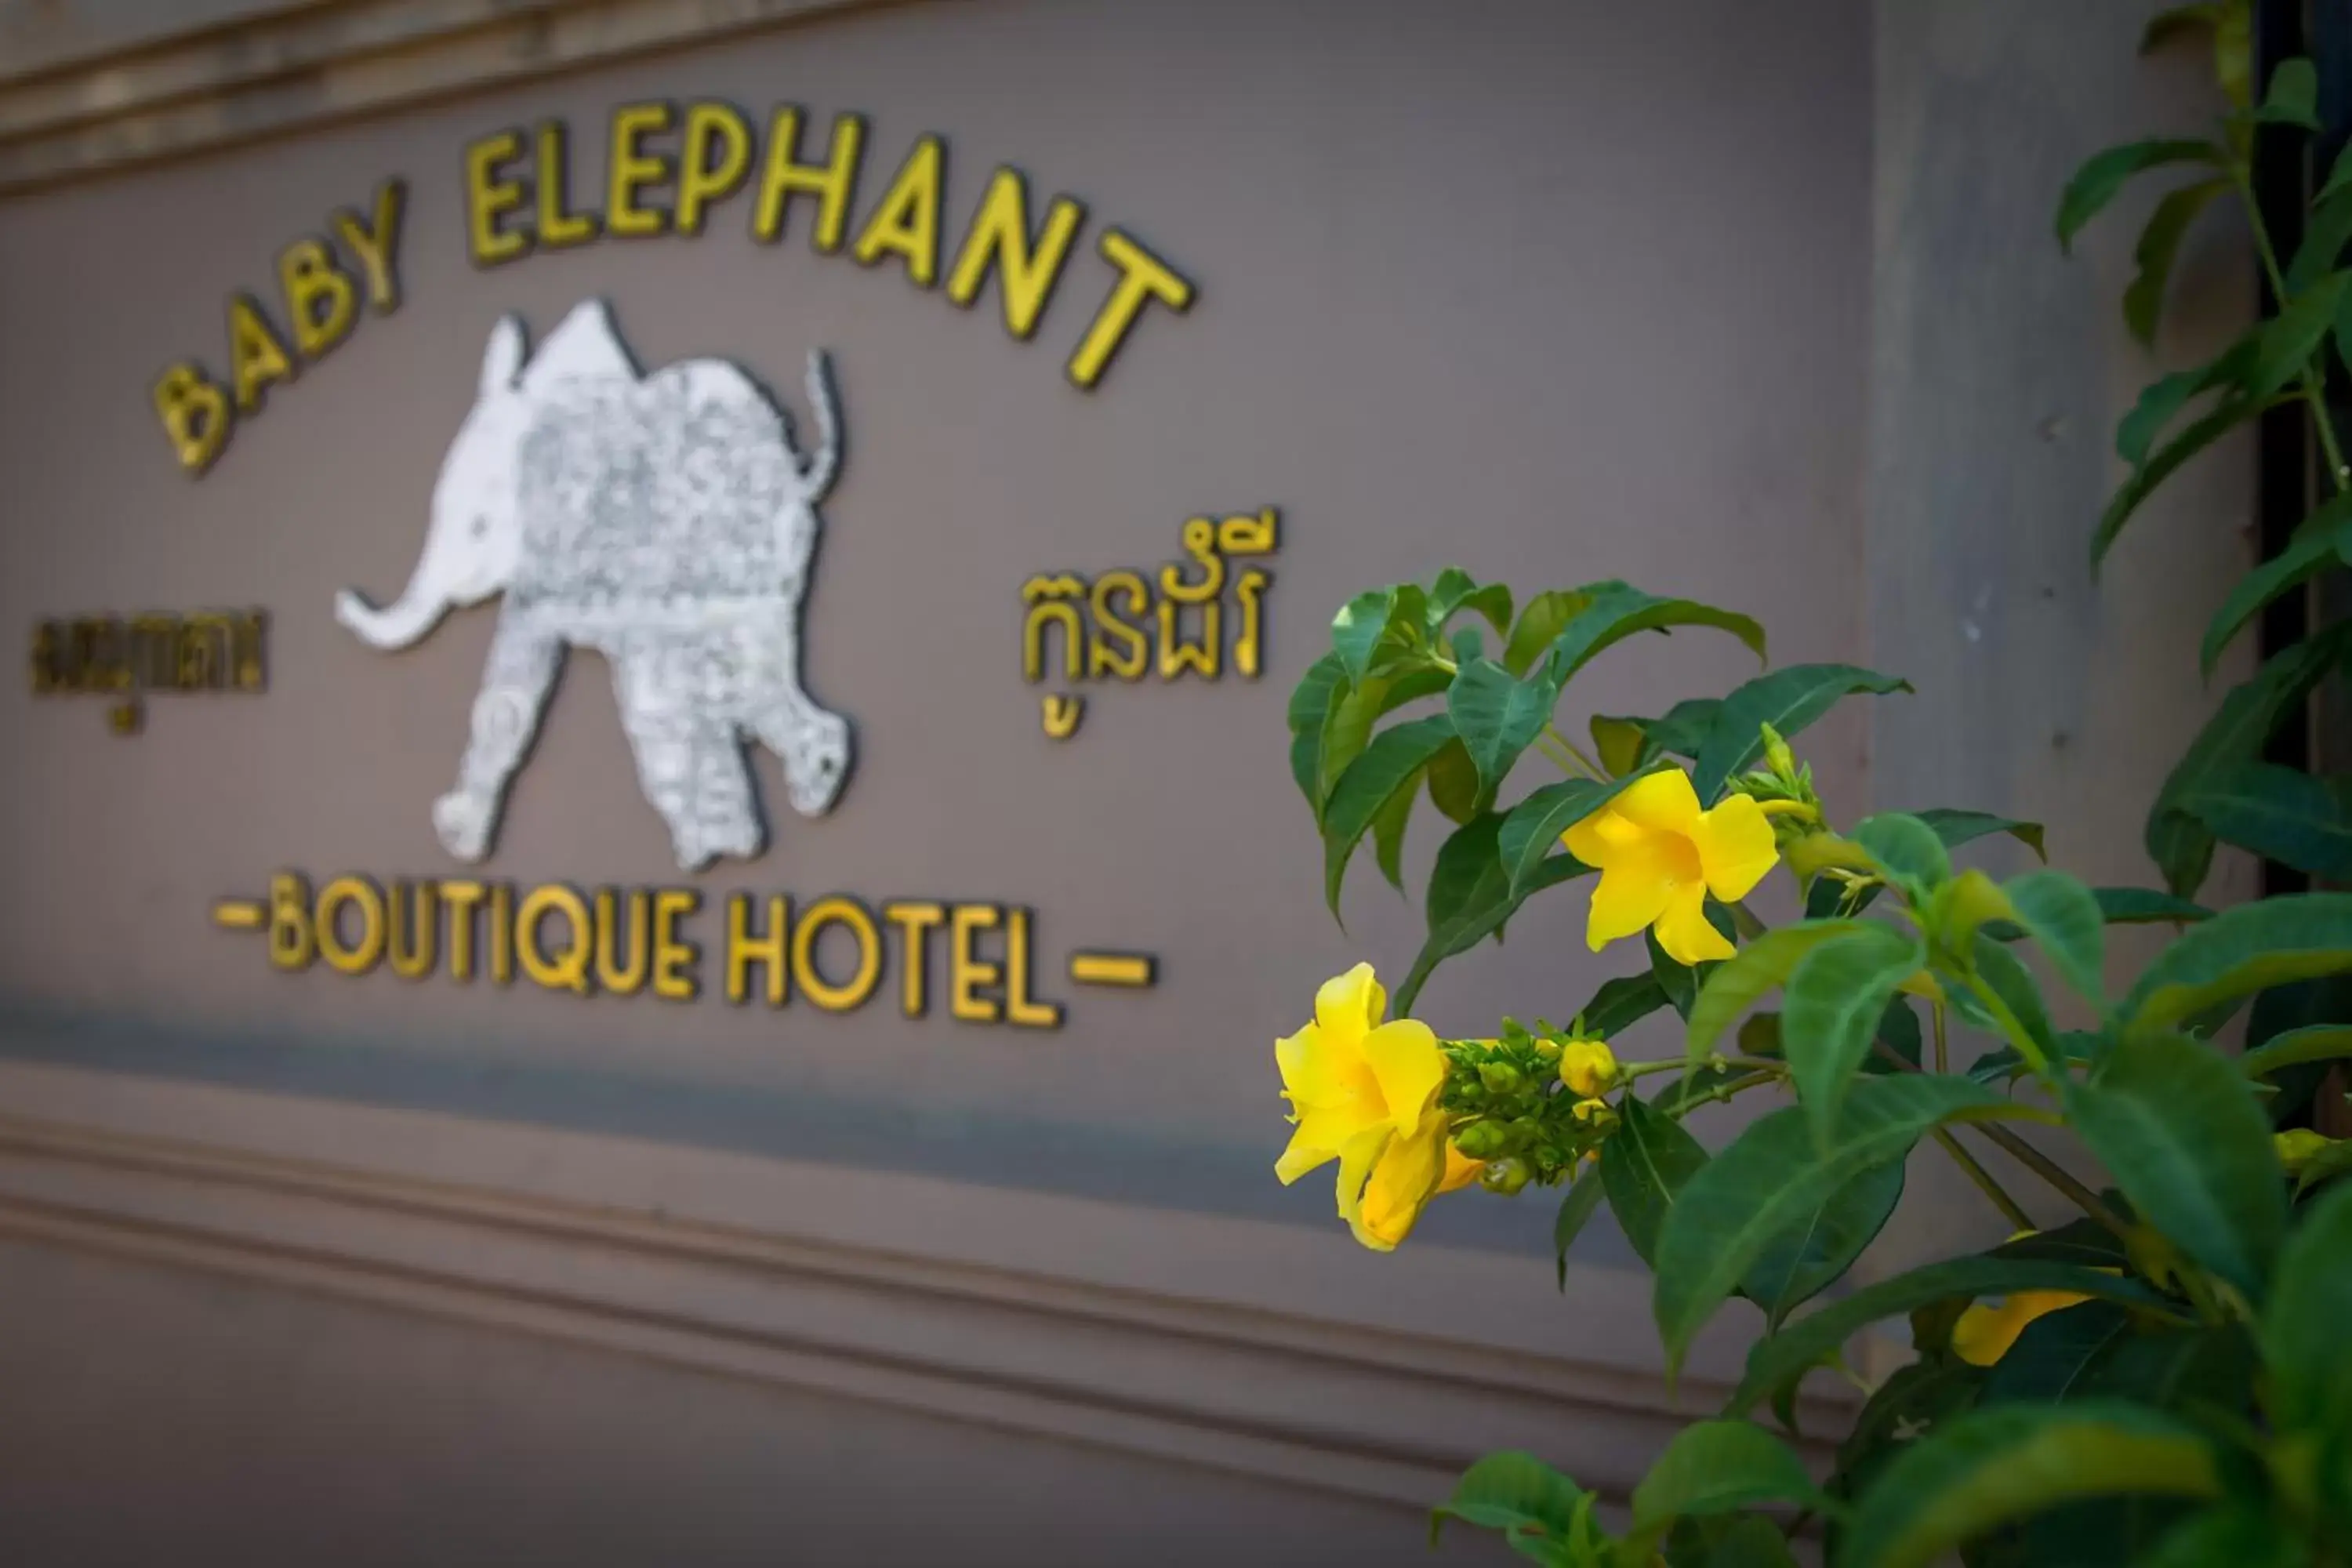 Property logo or sign in Baby Elephant Boutique Hotel